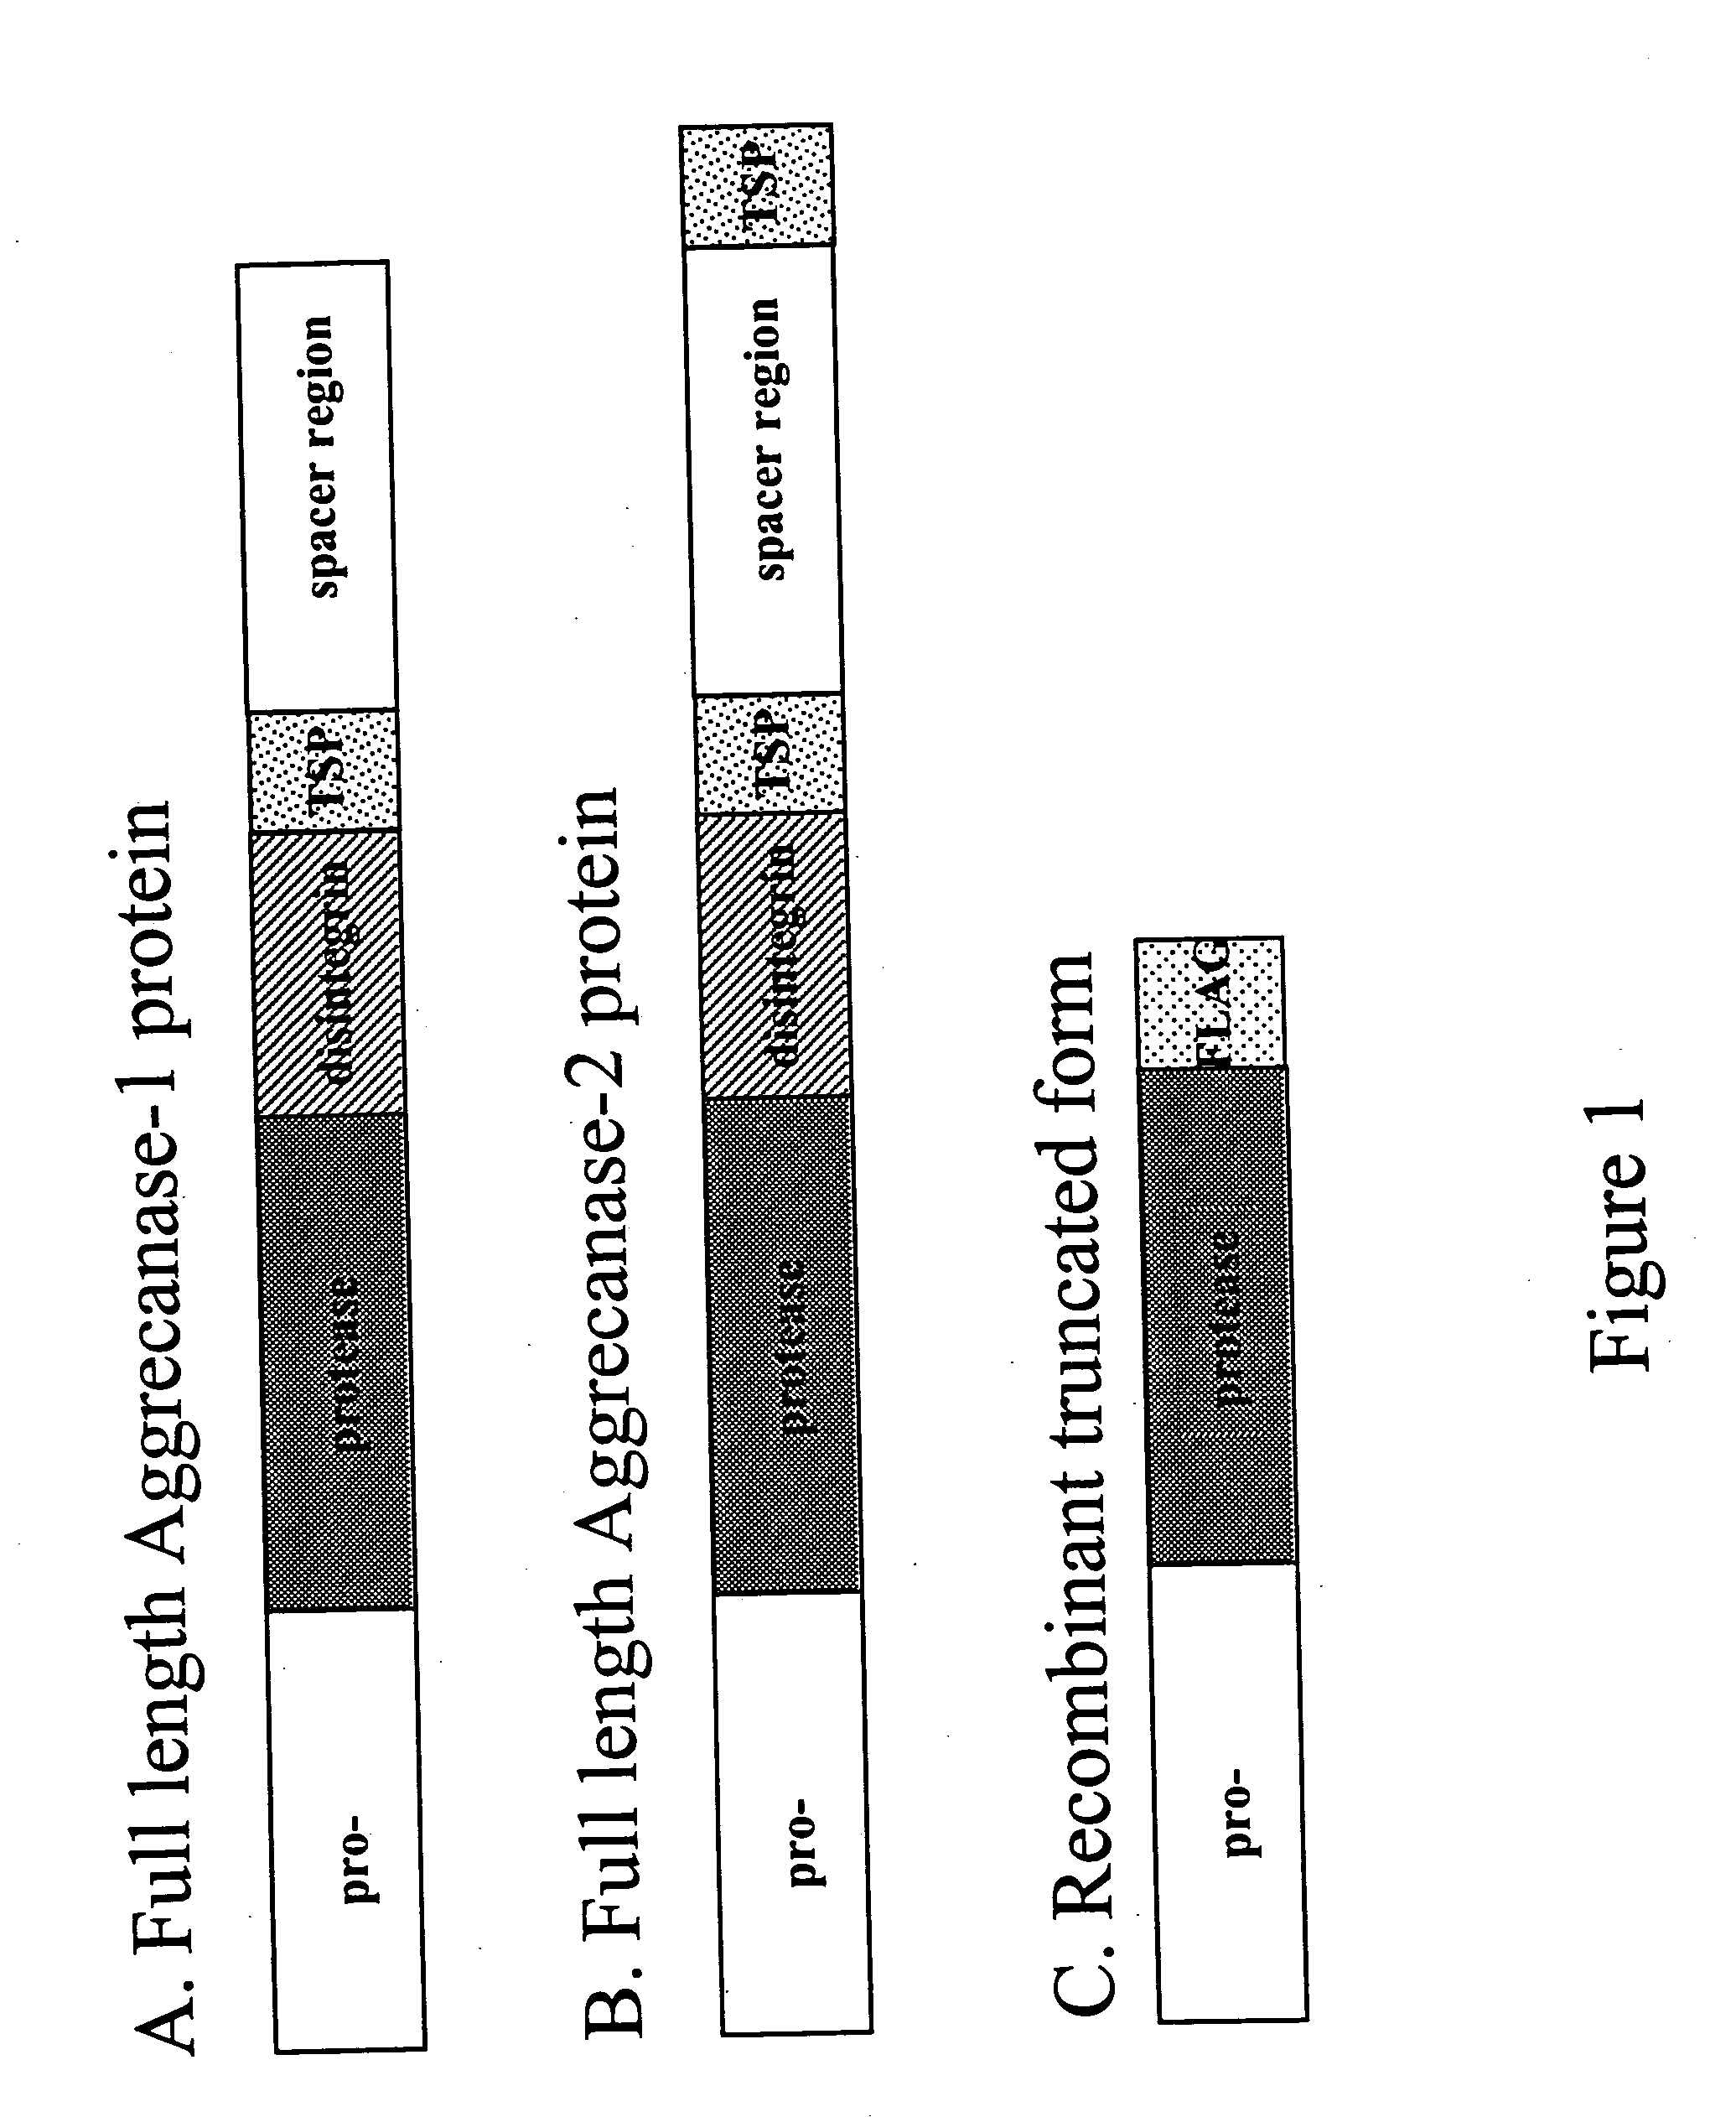 Aggrecanase-1 and -2 peptide substrates and methods